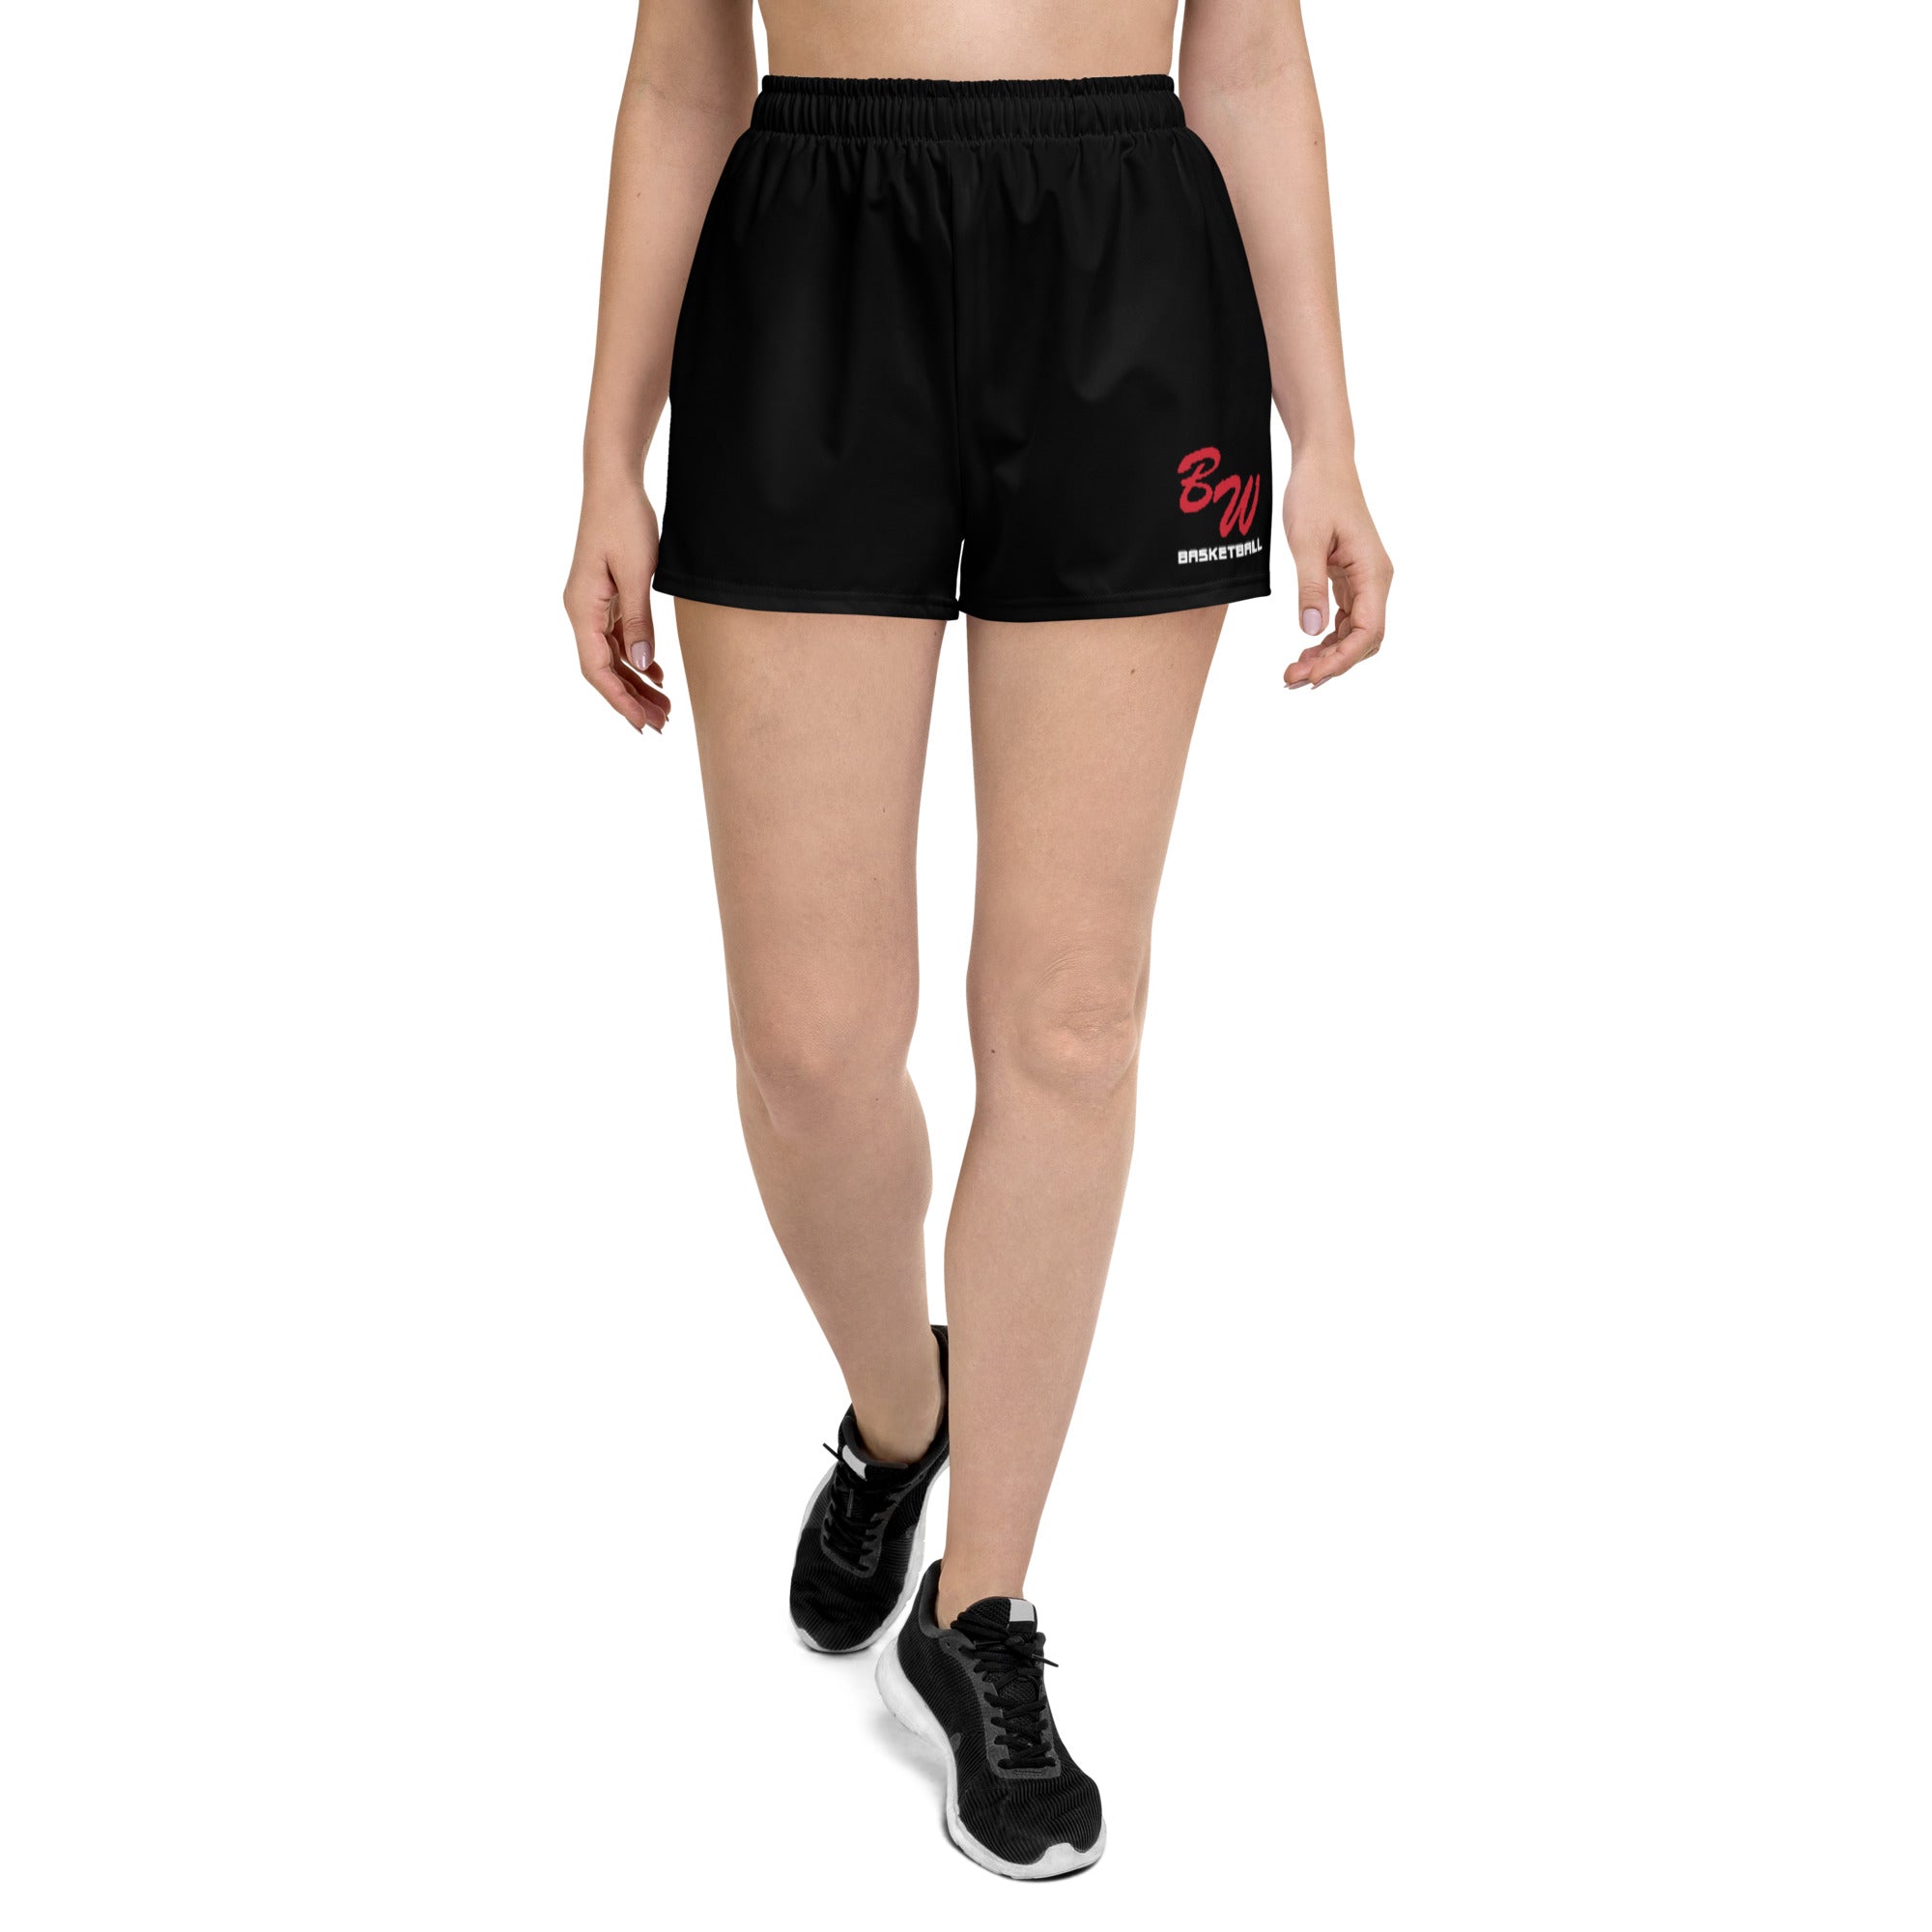 Women's Athletic Shorts for Basketball